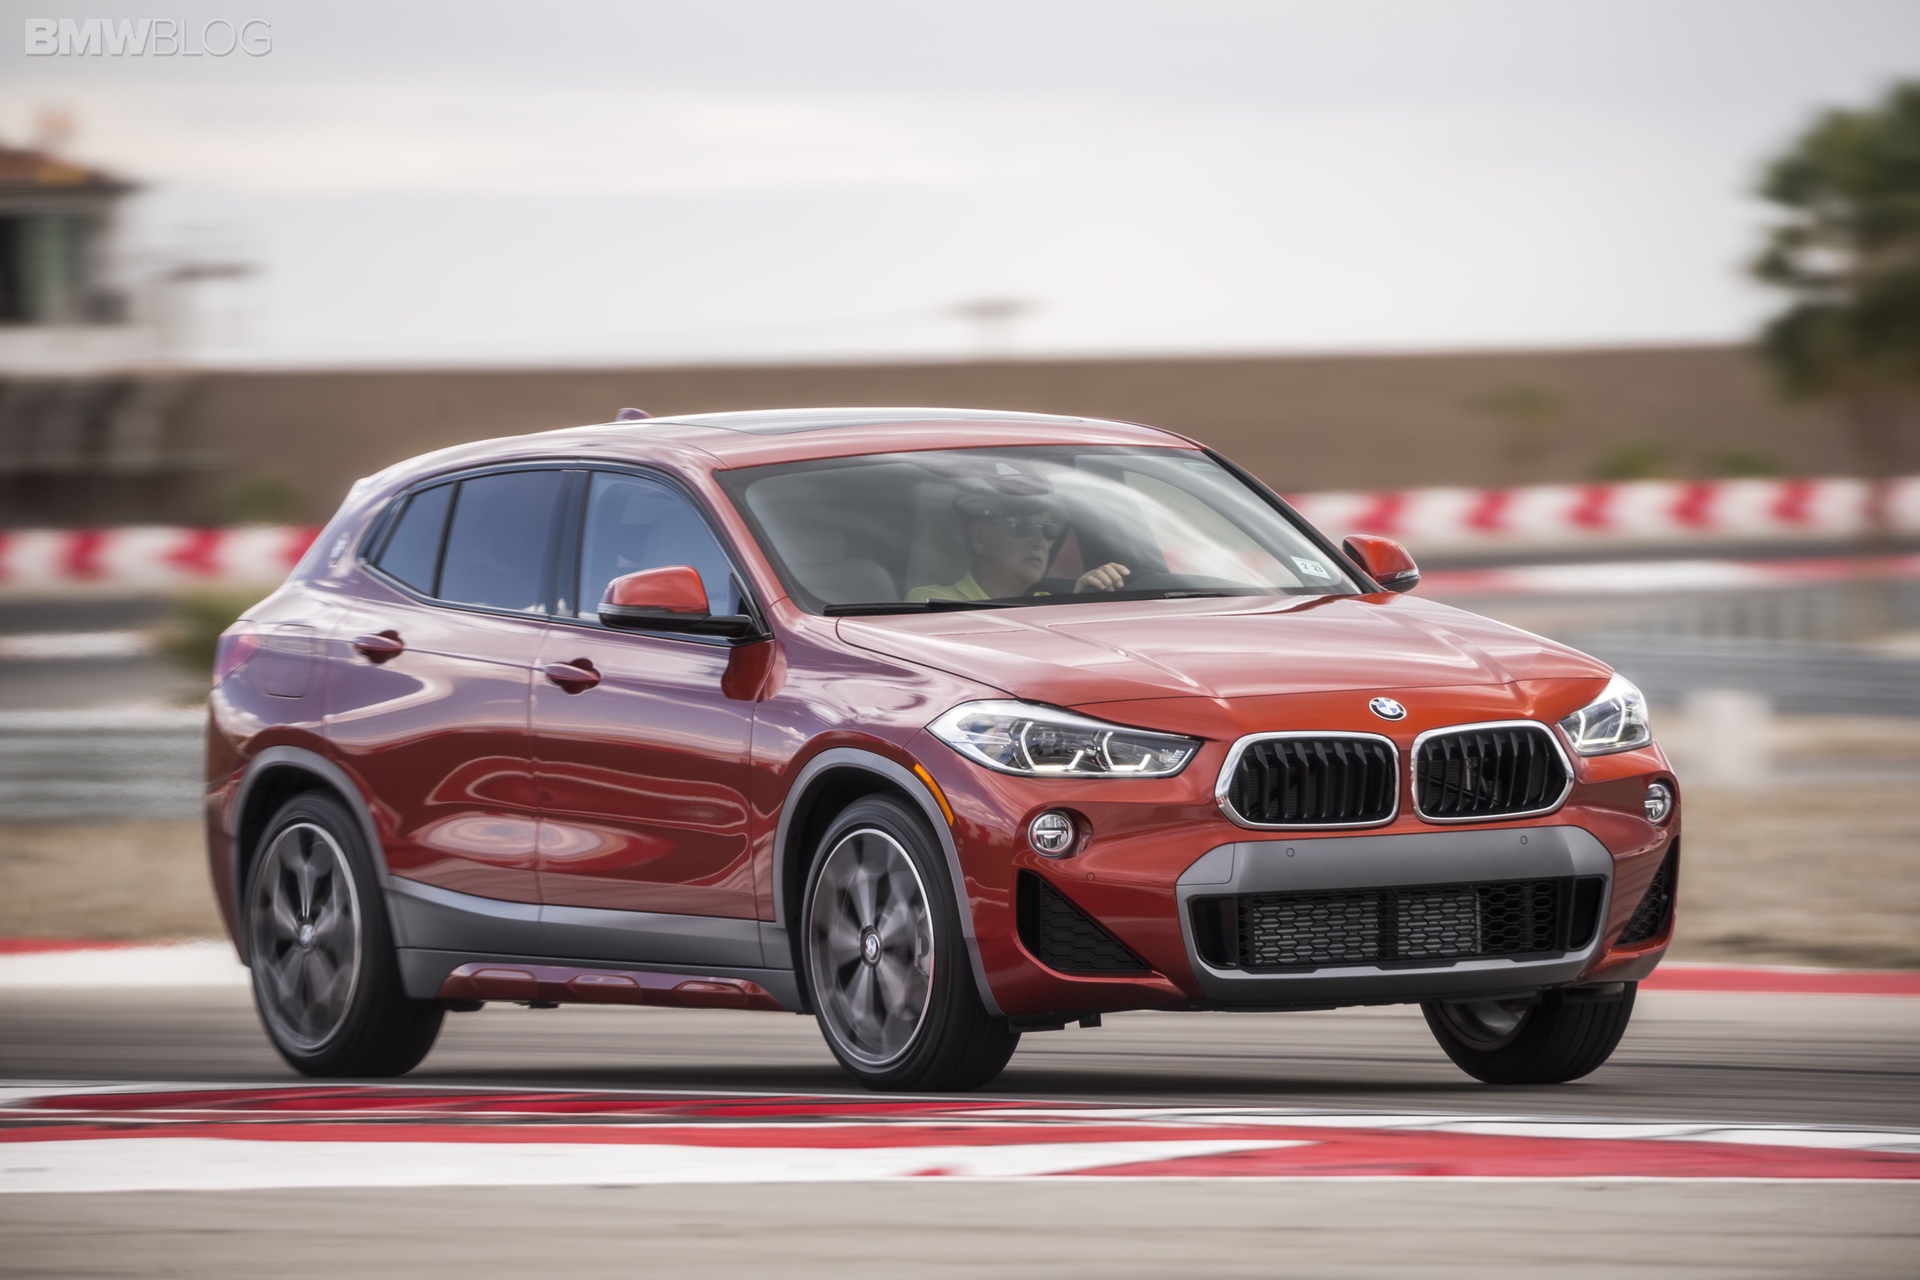 FIRST DRIVE: BMW X2 xDrive28i — Defying the Odds